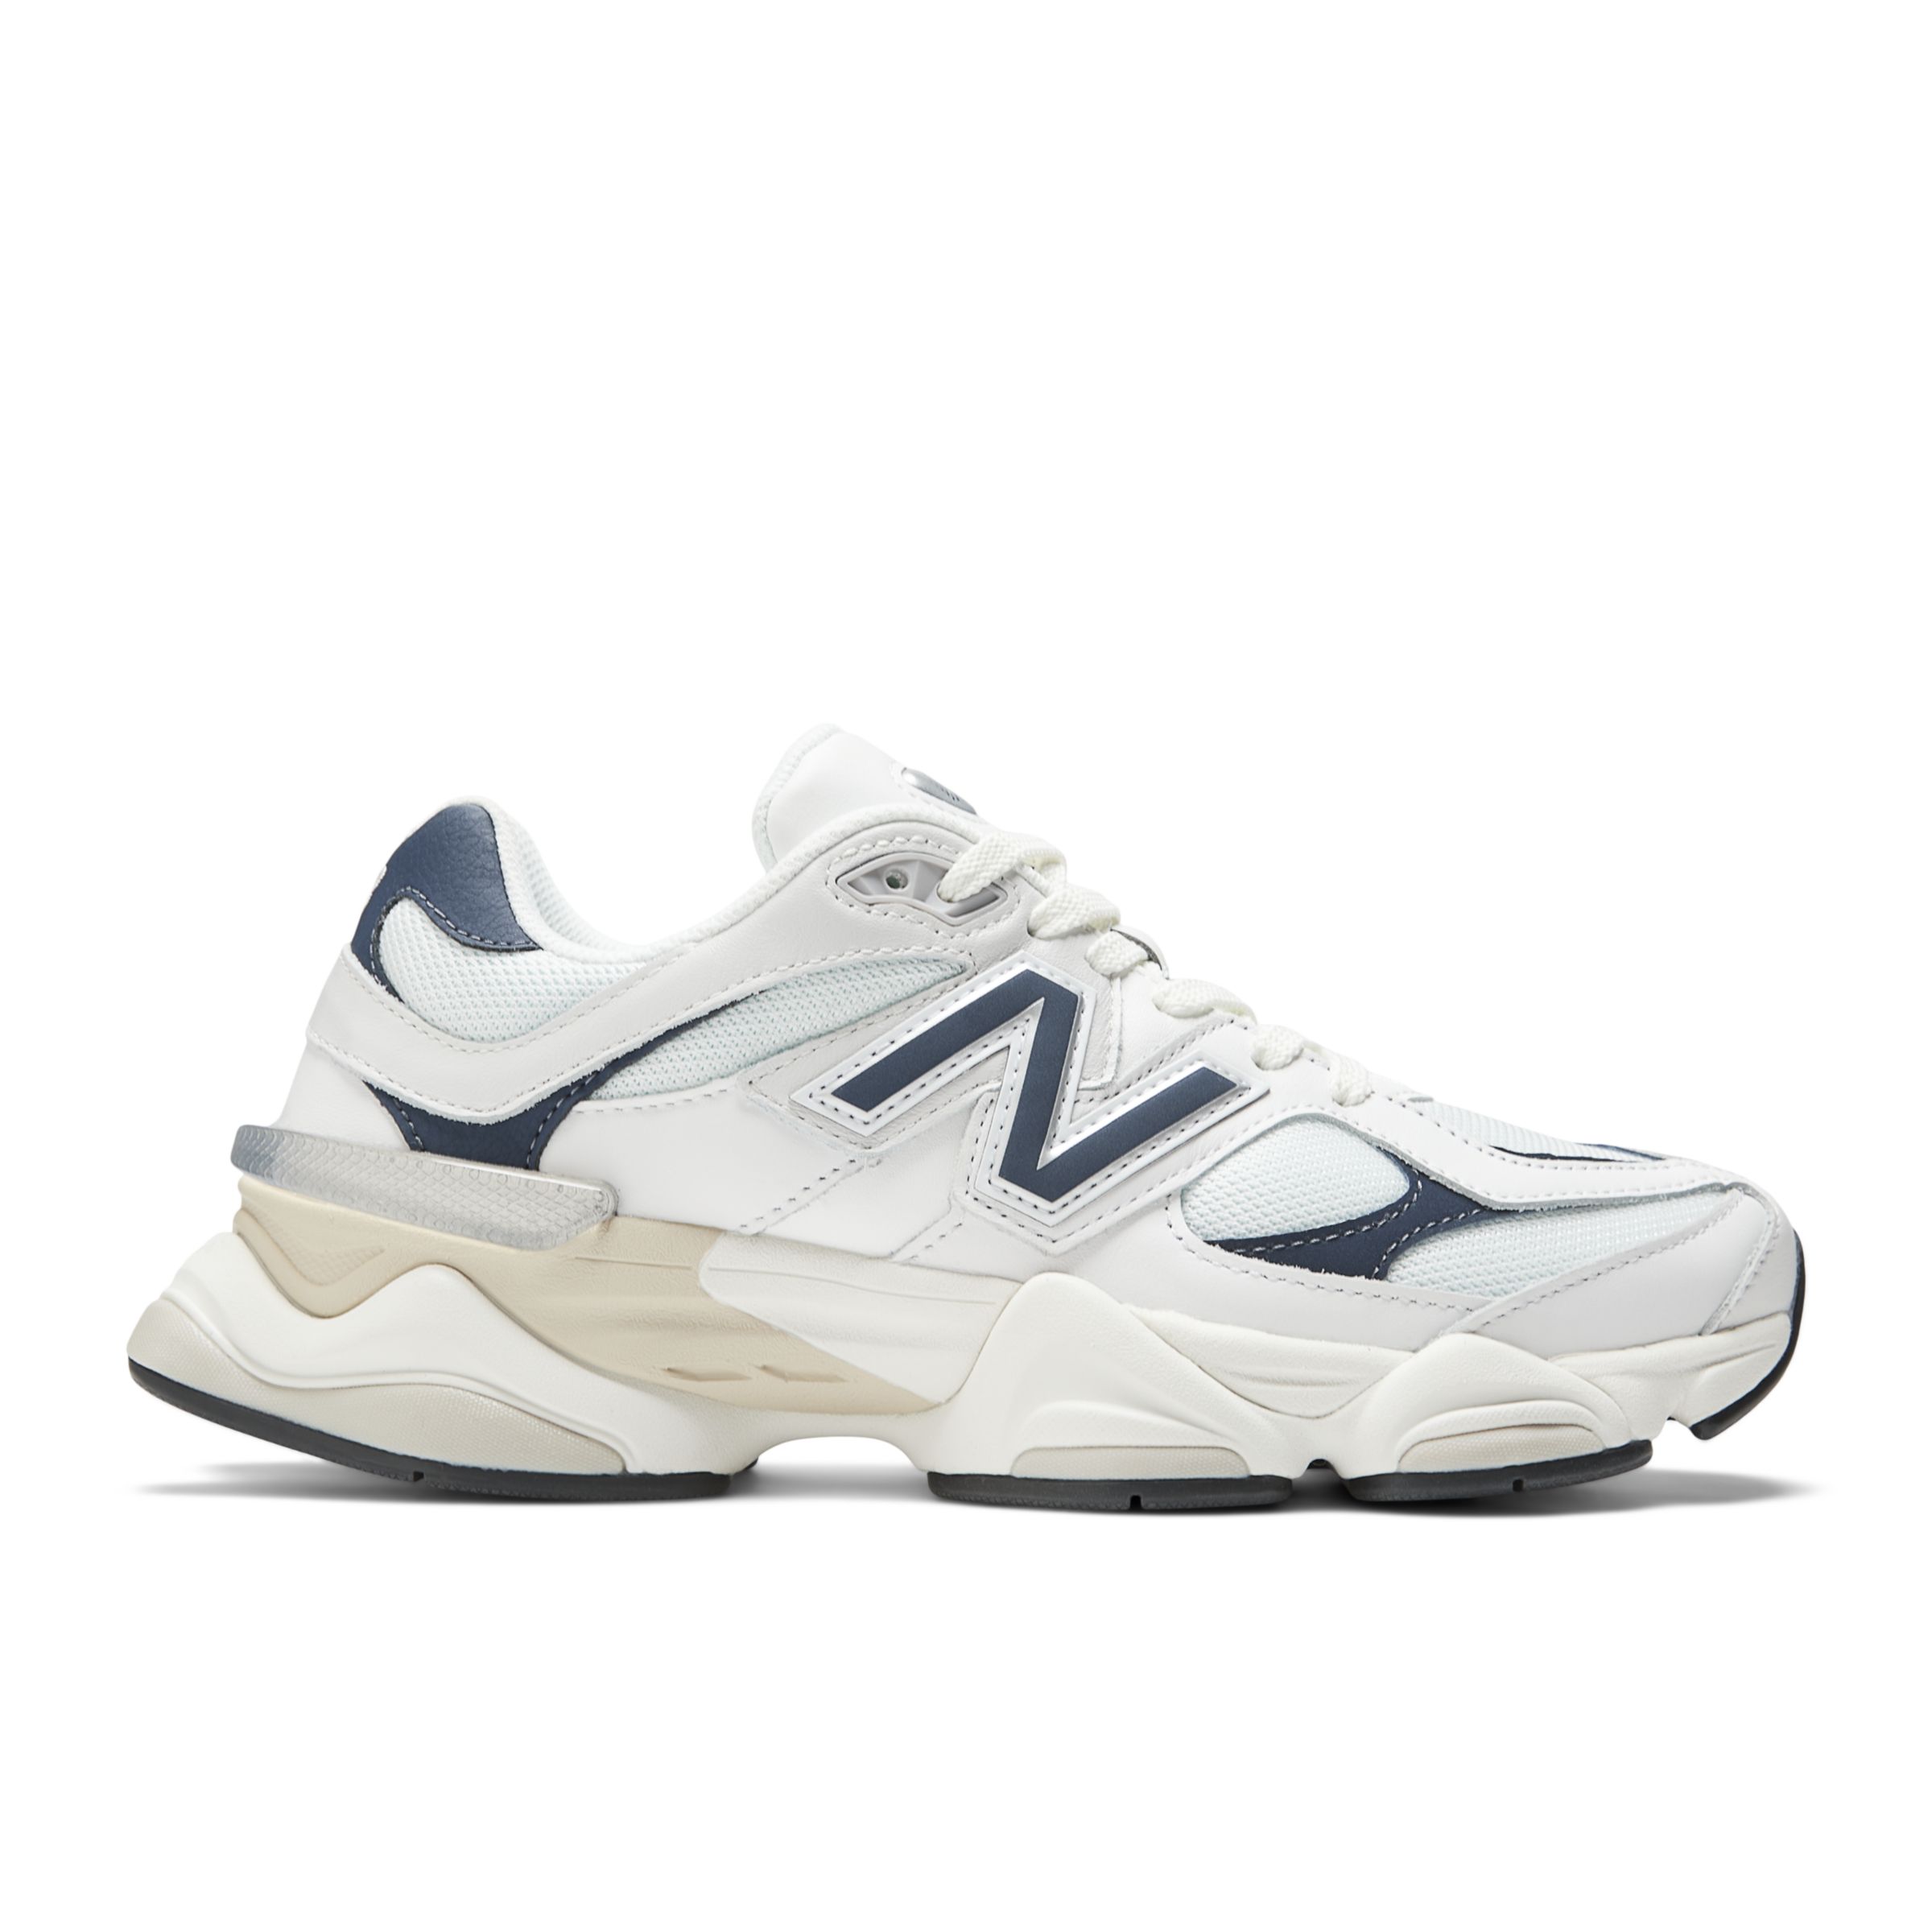 New Balance 9060 trainers in moonrock and navy